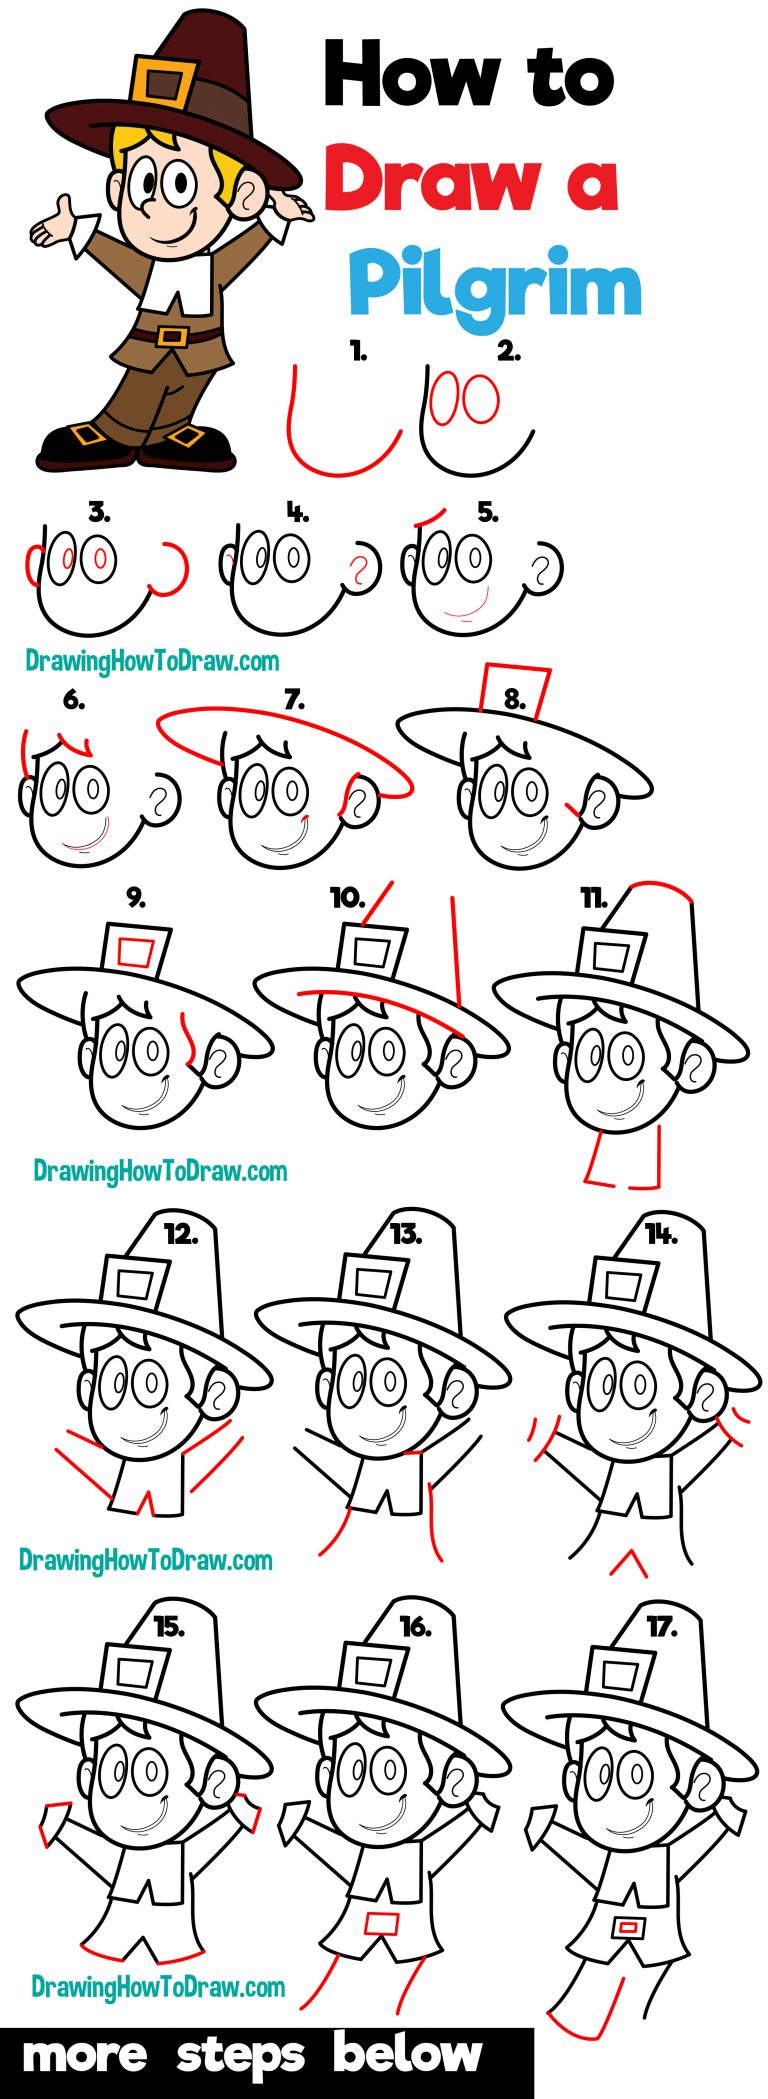 How to Draw a Cartoon Pilgrim for Thanksgiving Easy Step by Step